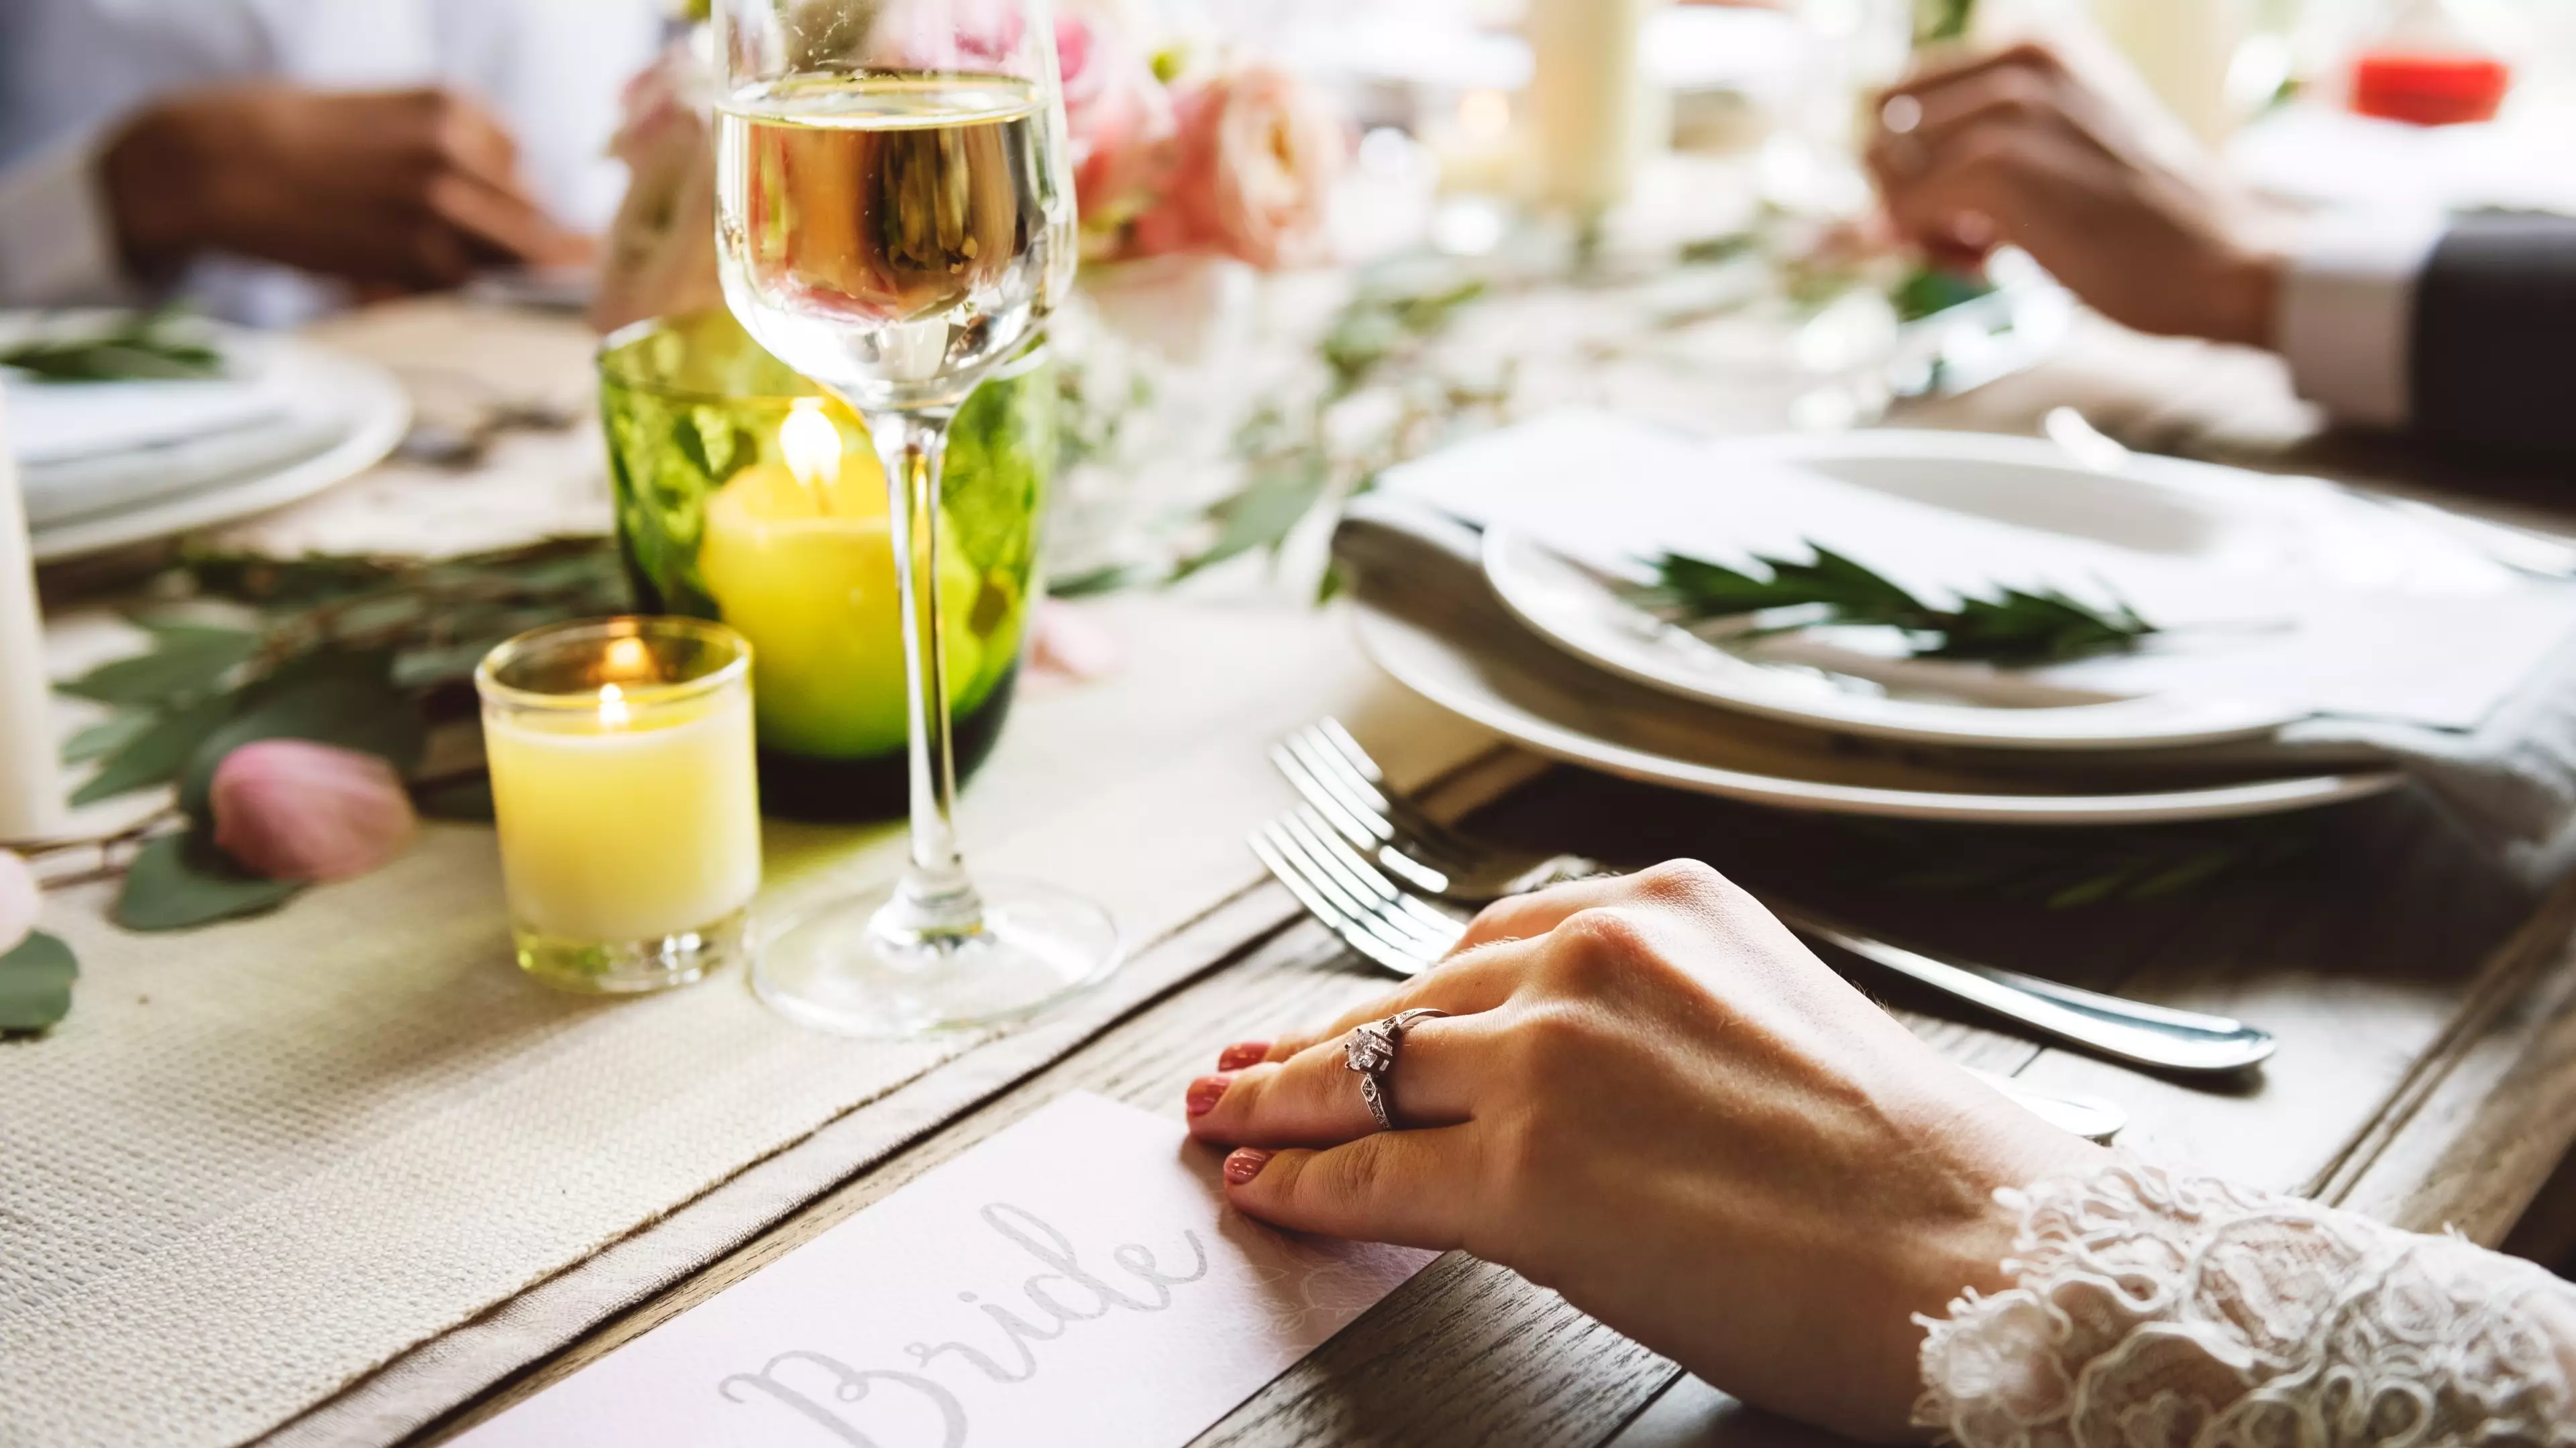 Bride Sparks Debate After Revealing She Won't Provide Food On Her Wedding Day